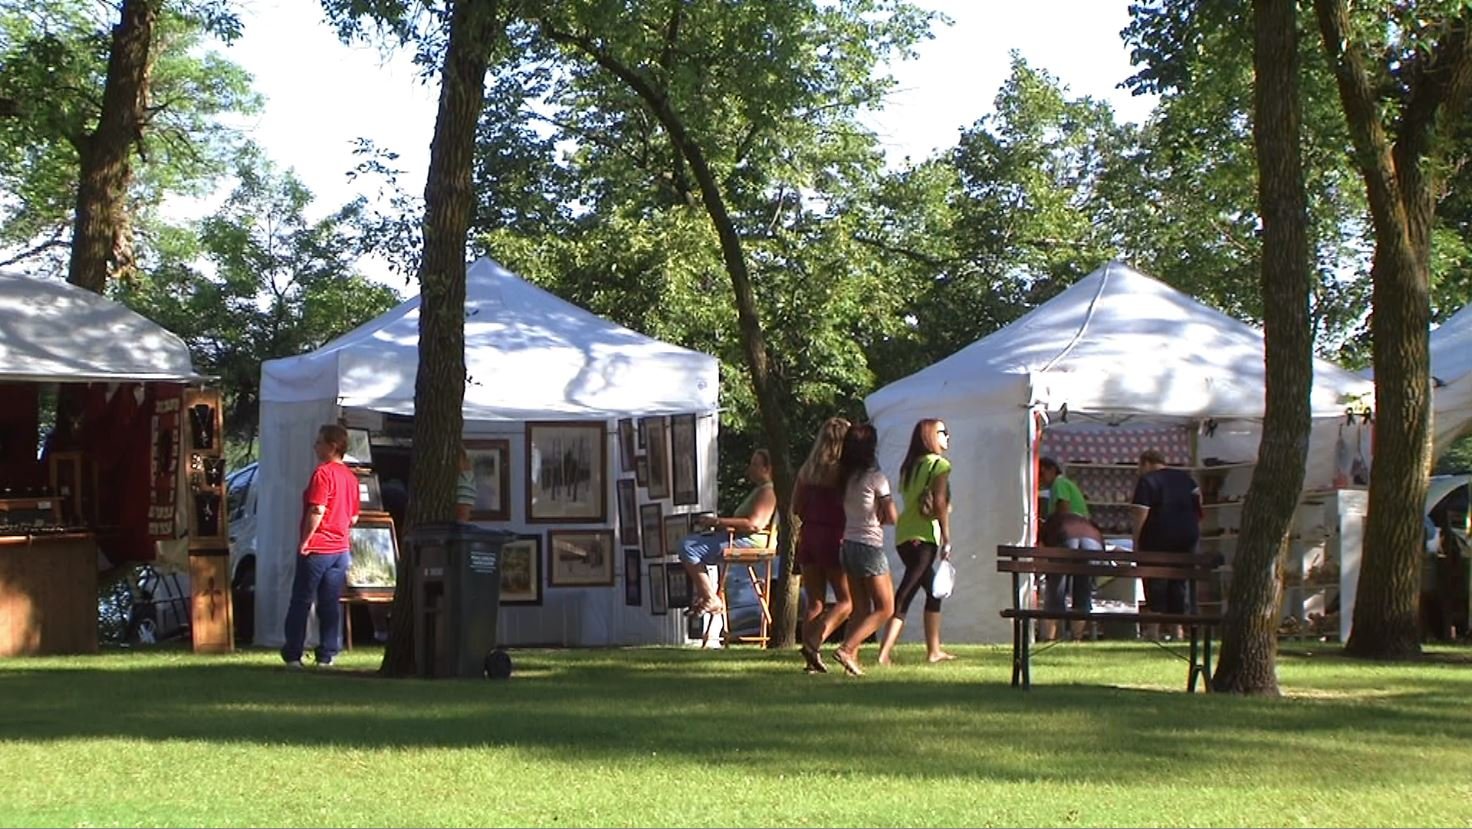  Art in the Park shoppers and vendors at City Park in Alexandria, MN 